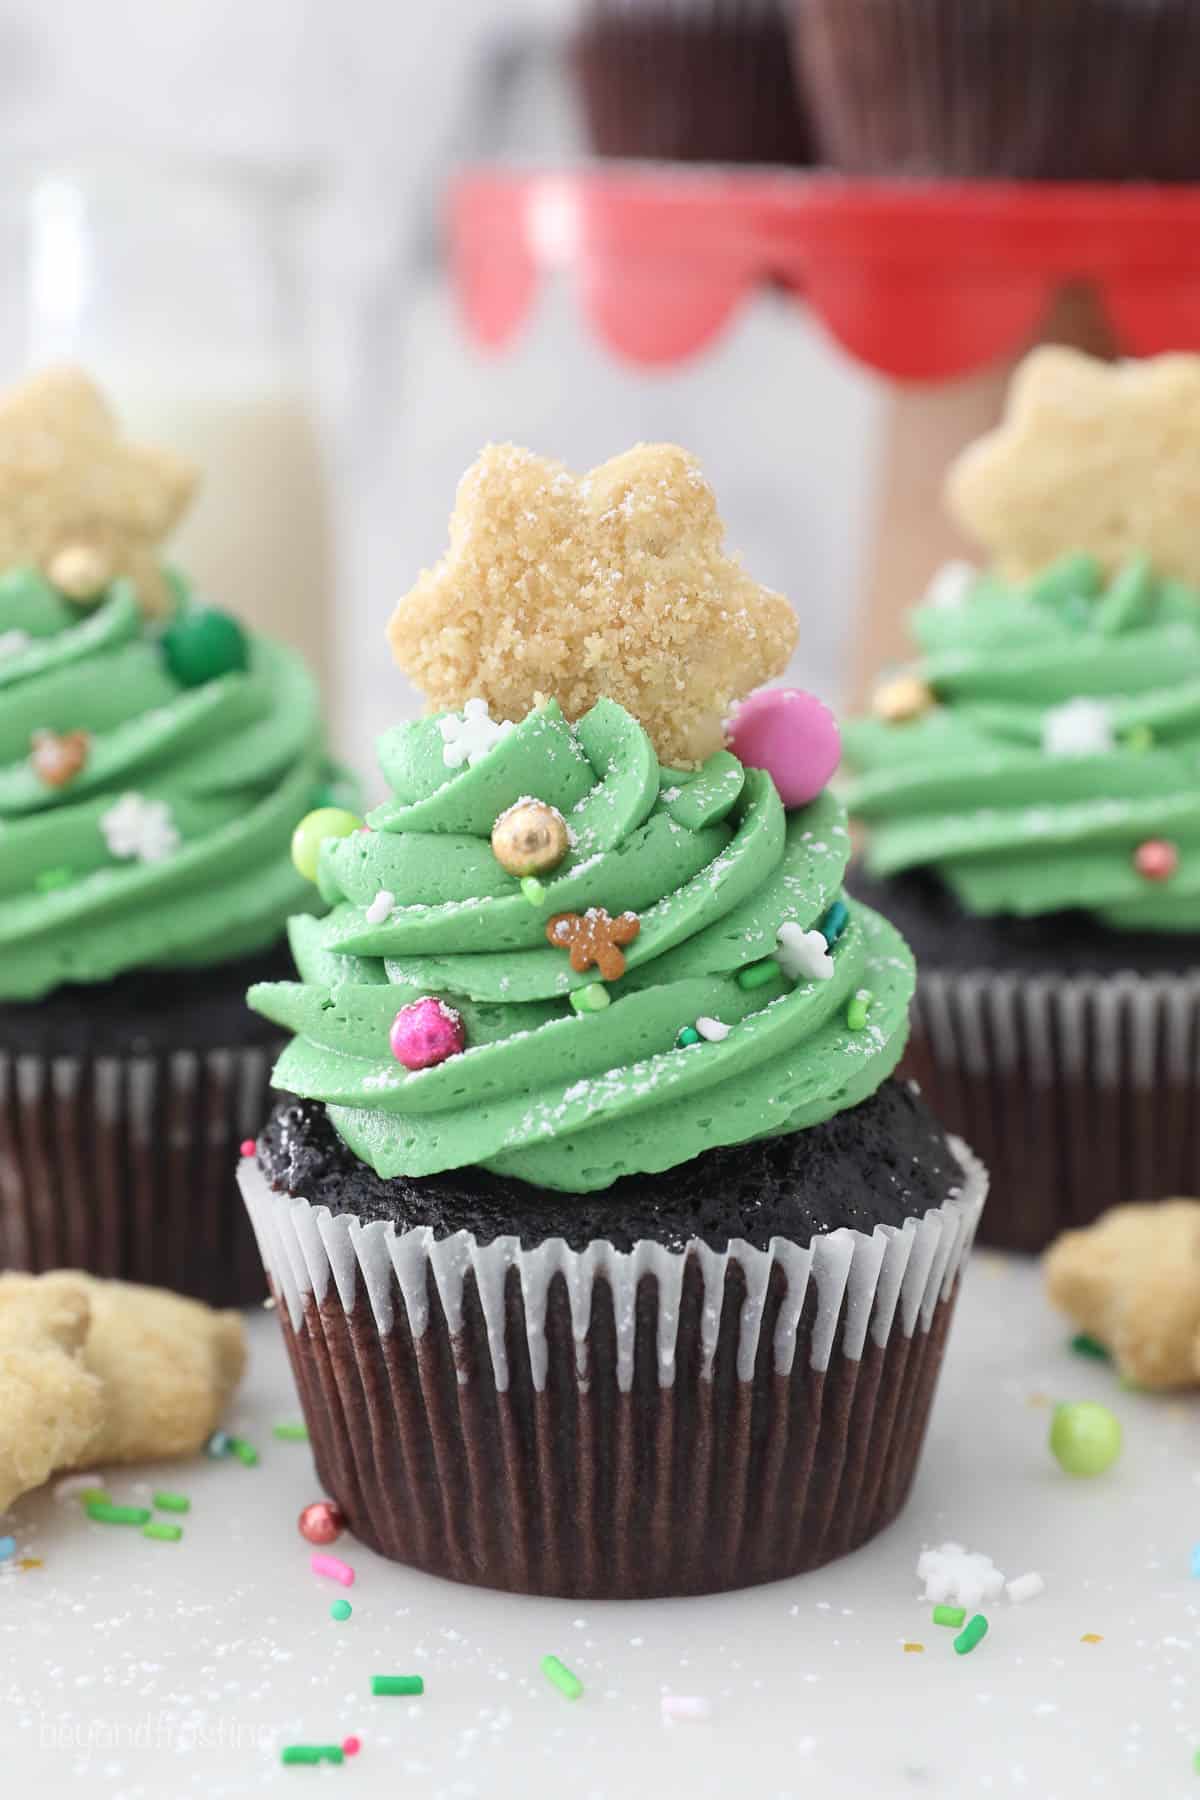 A chocolate cupcake decorated with green frosting, sprinkles and a star cookie top